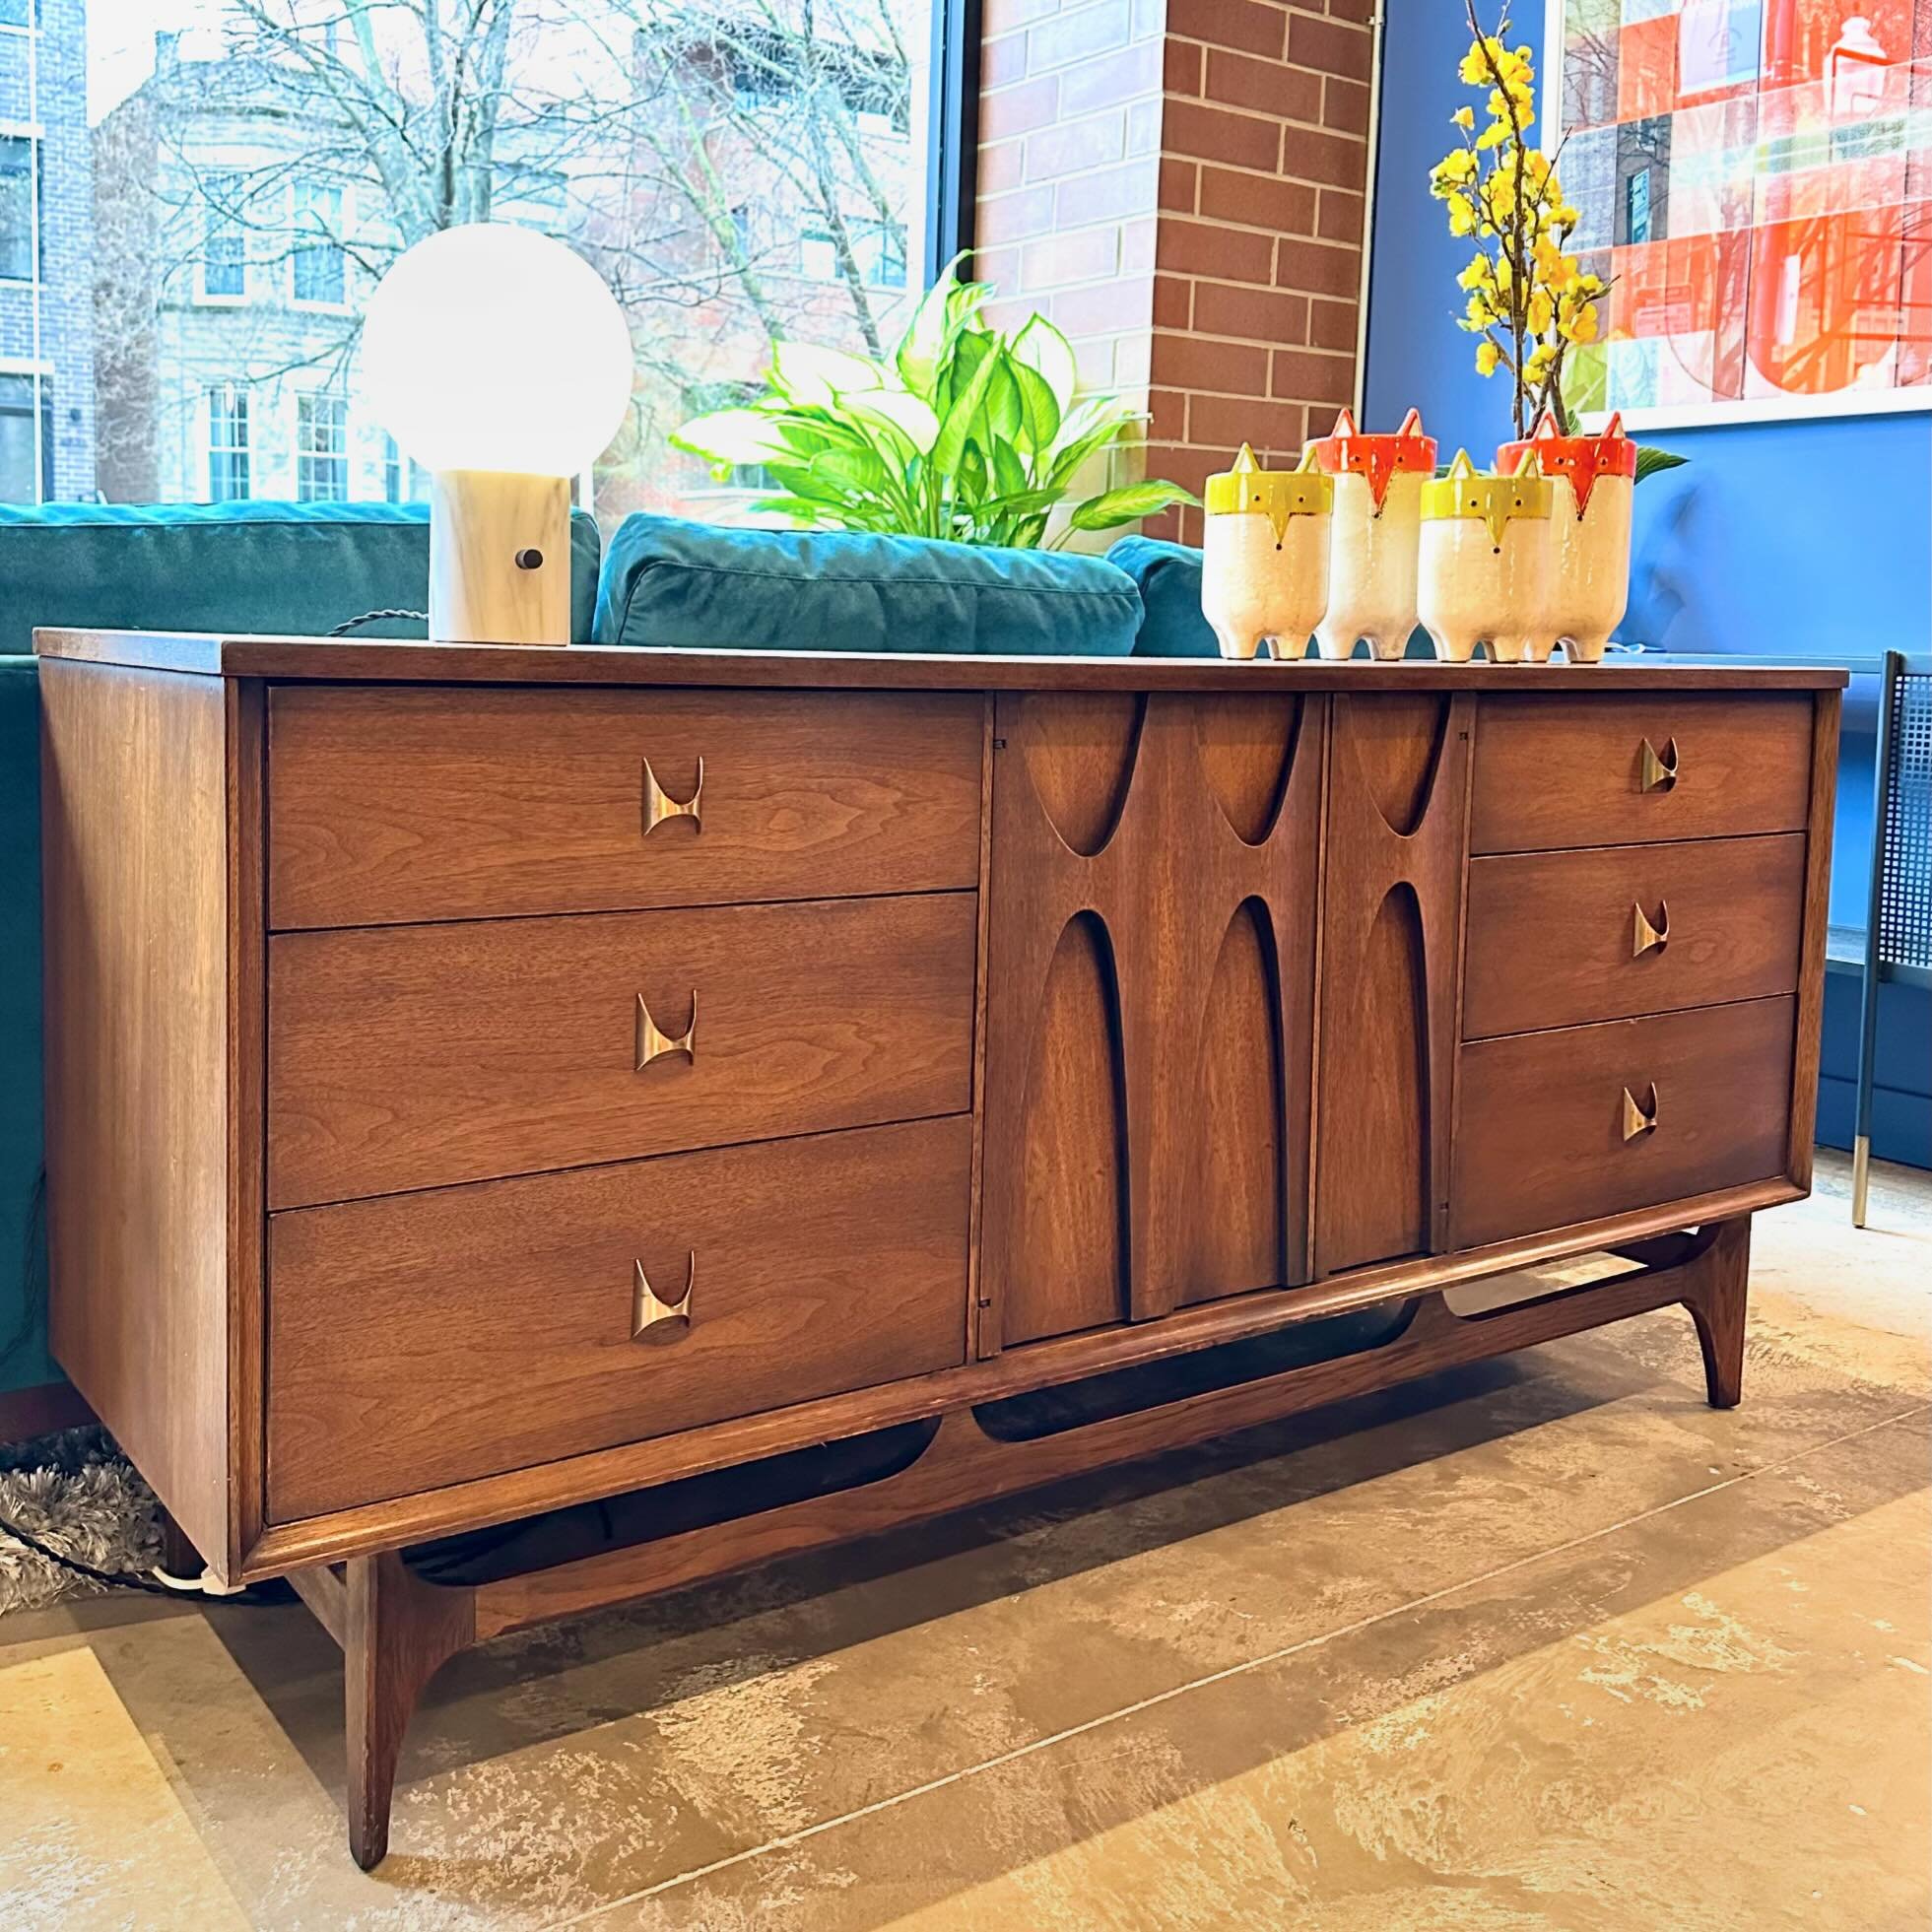 New in store! This Broyhill Brasilia lowboy is in incredible condition. Could be the perfect piece for your dining, living or bed room! W66 D19 H31

#districtchicago #broyhillbrasilia #midcenturyperfection #shopsmall #supportyourlocaleverything